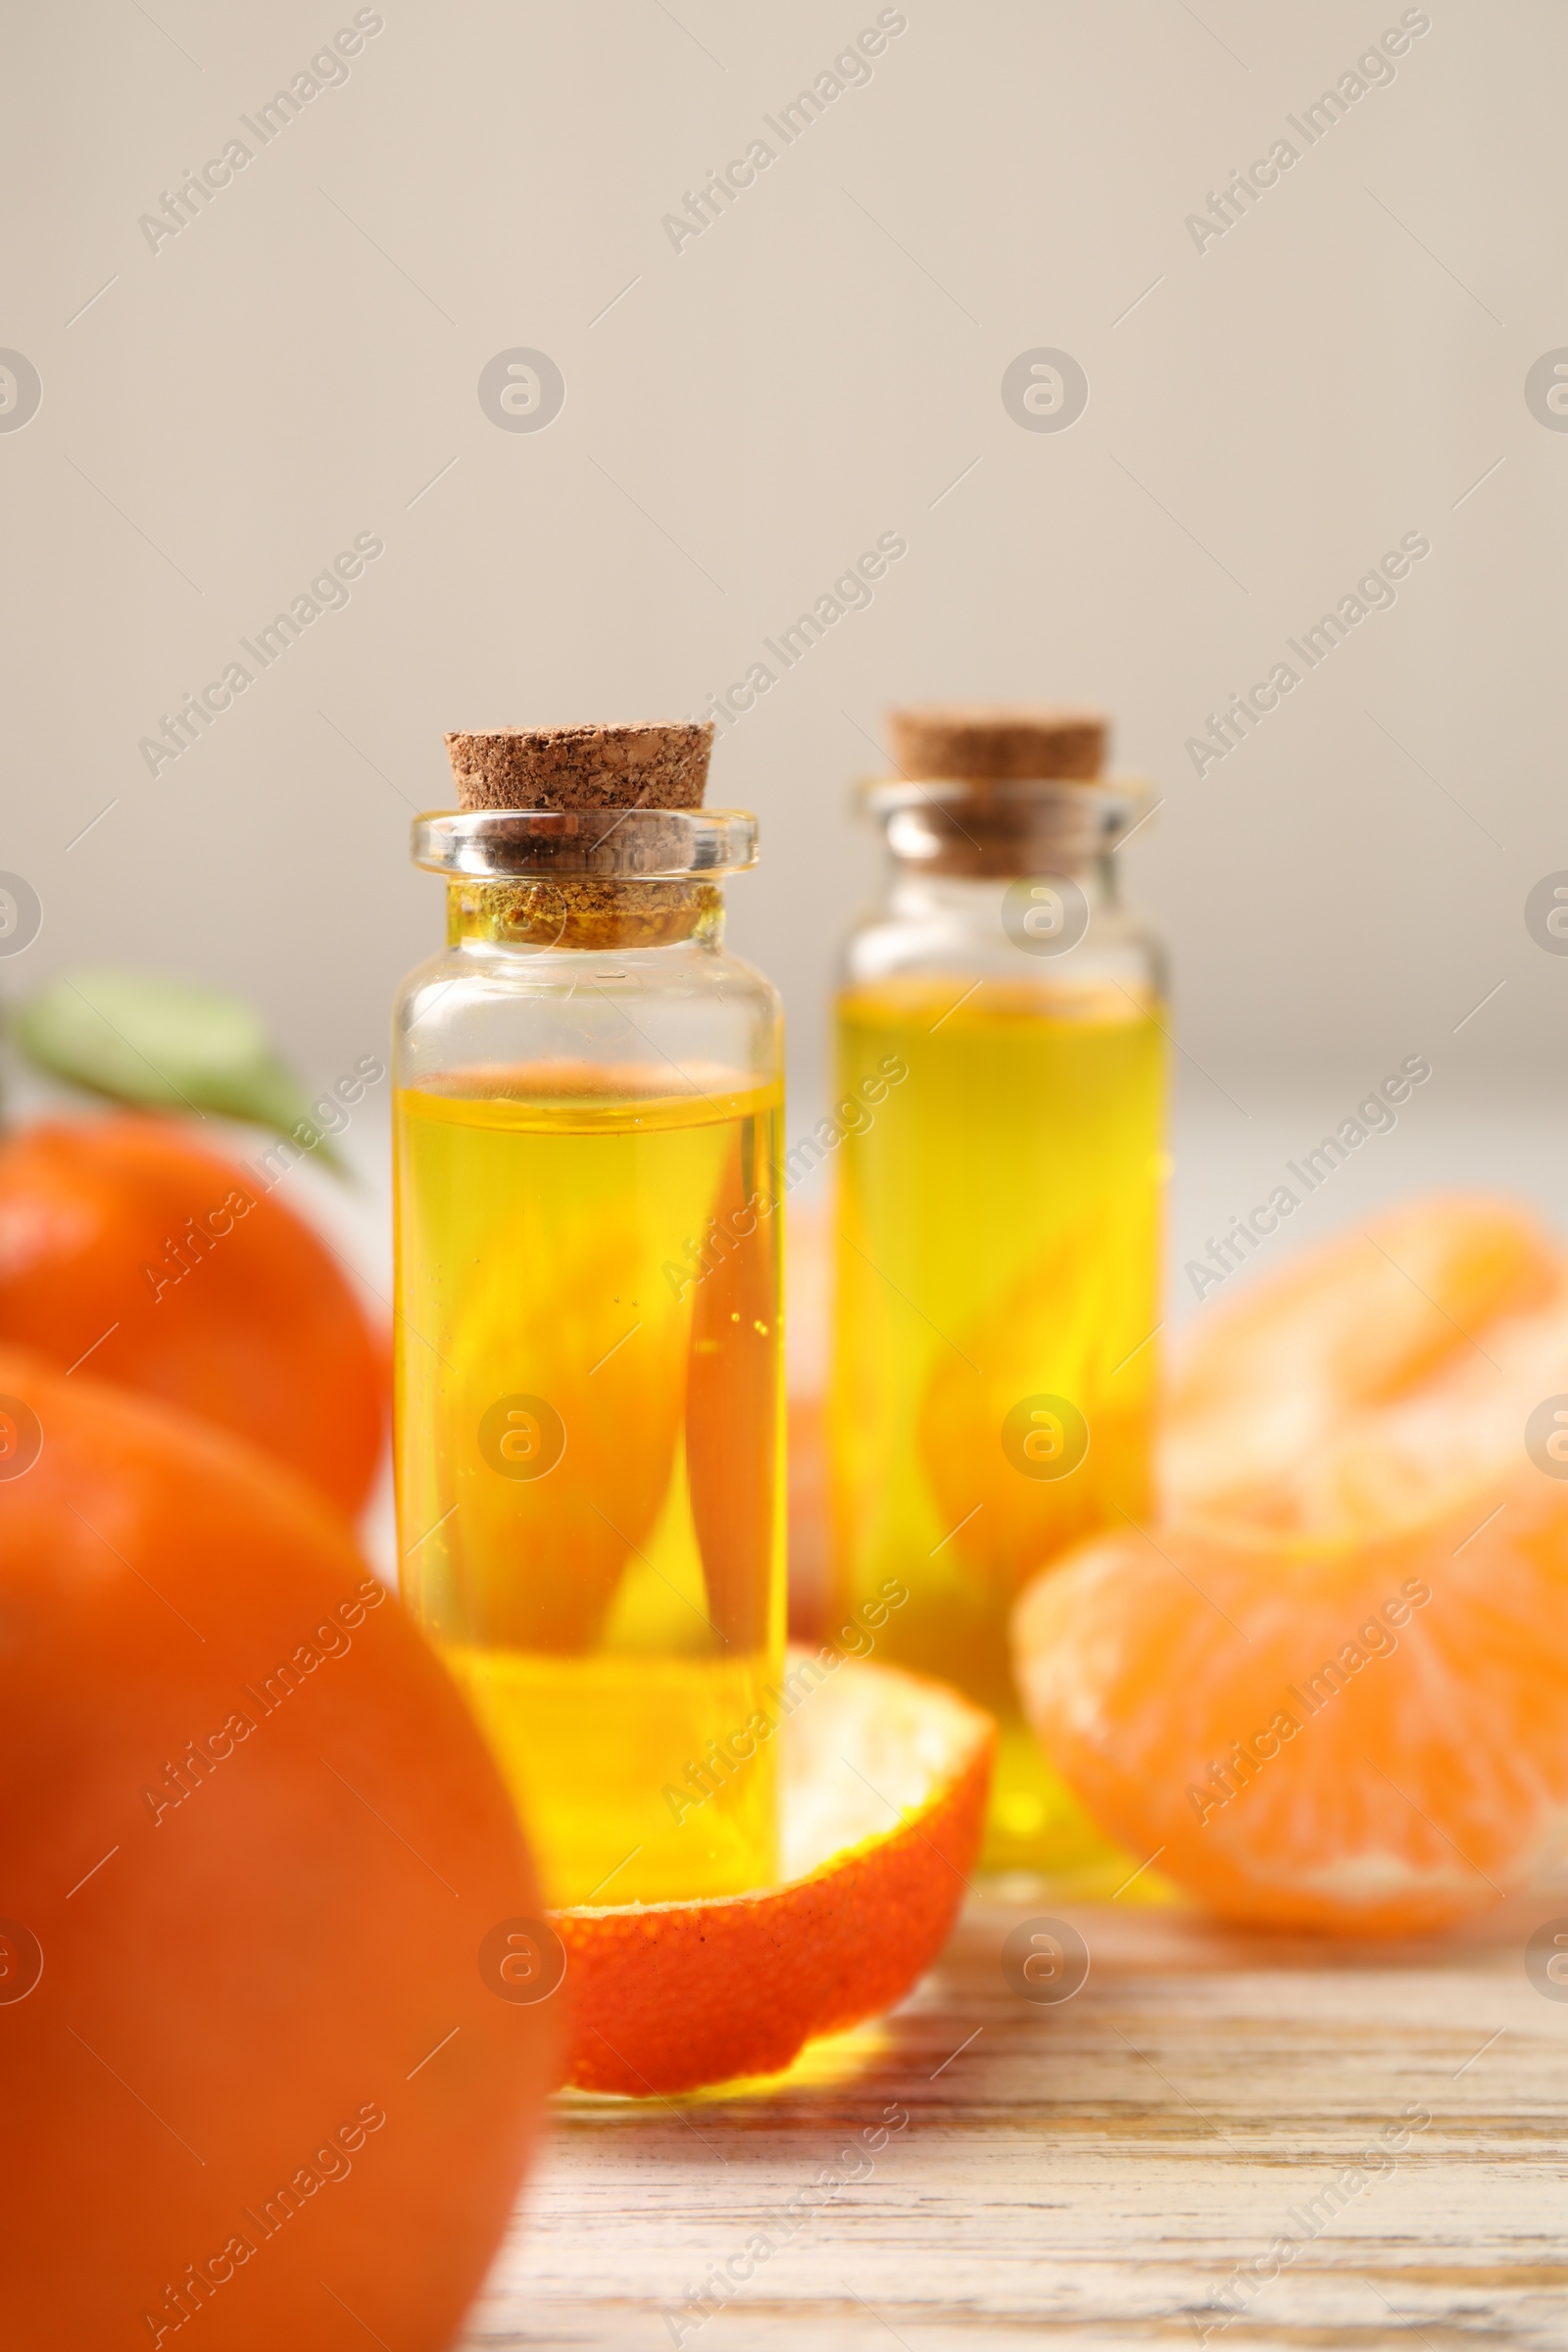 Photo of Bottles of tangerine essential oil, fresh fruits and peel on white wooden table